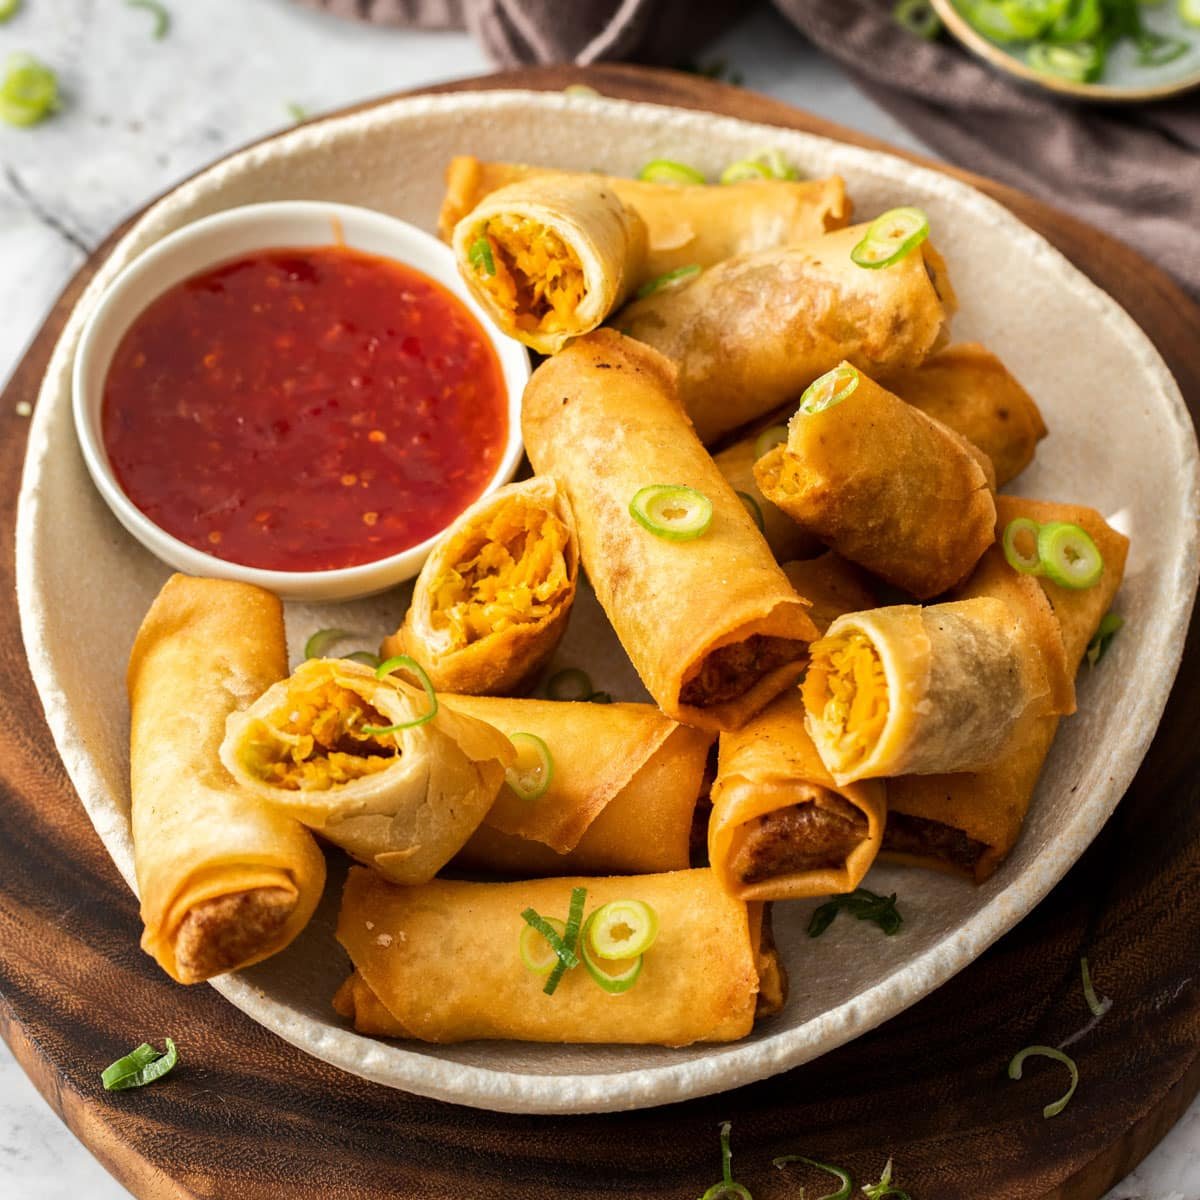 https://www.thecookingcollective.com.au/wp-content/uploads/2022/08/Vegetable-Spring-Rolls-2-1.jpg